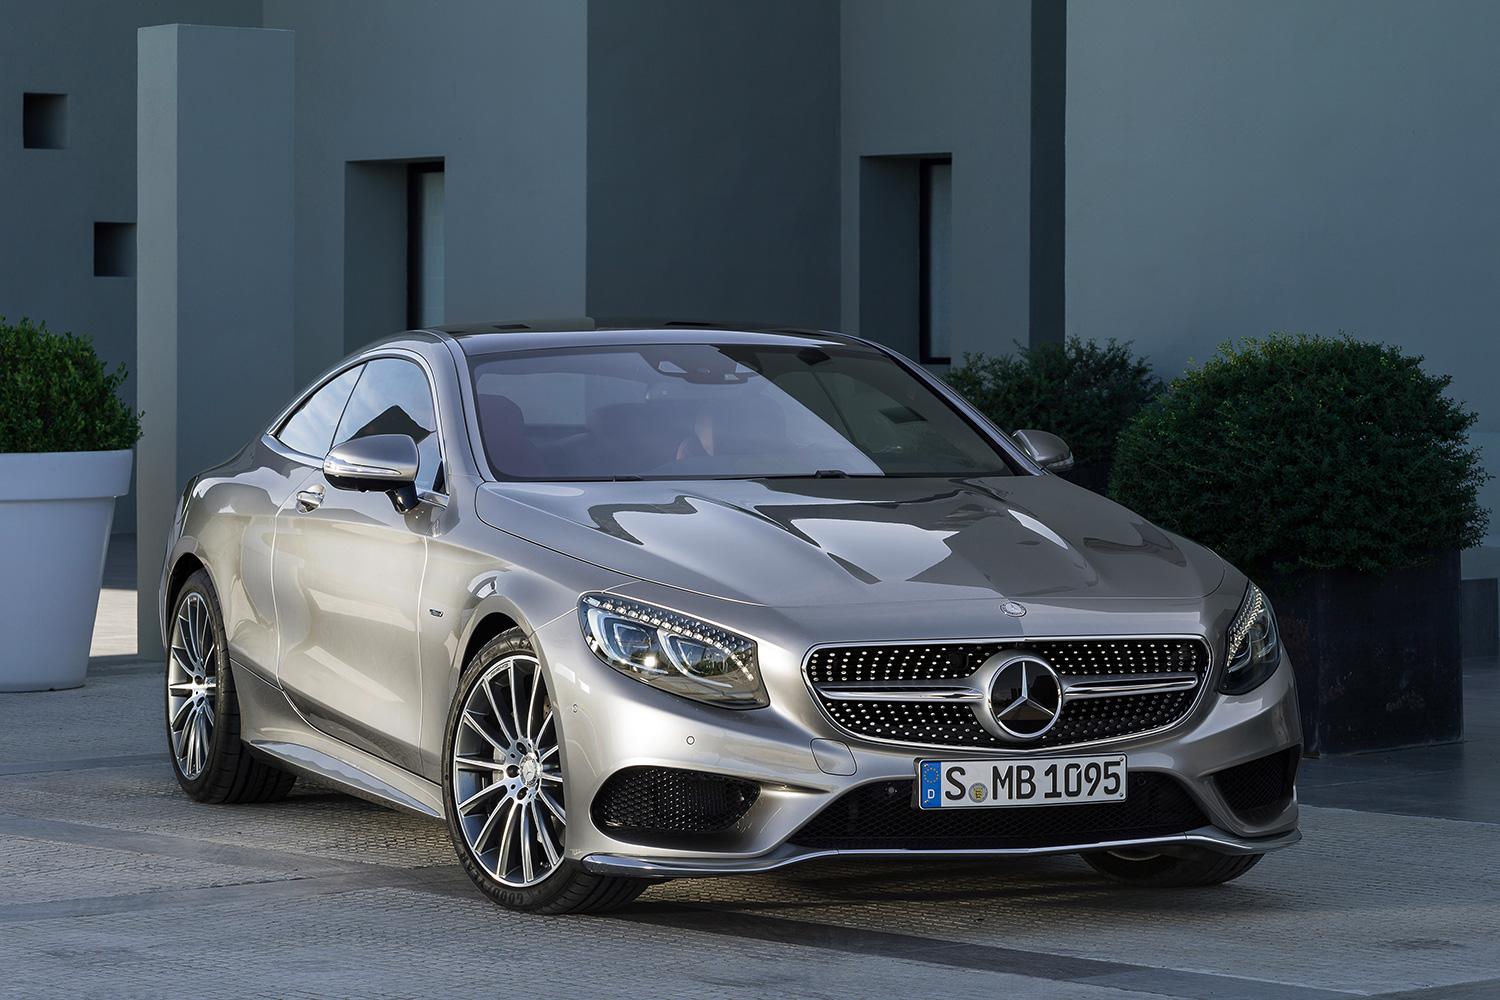 2015 Mercedes S Class Coupe front angle